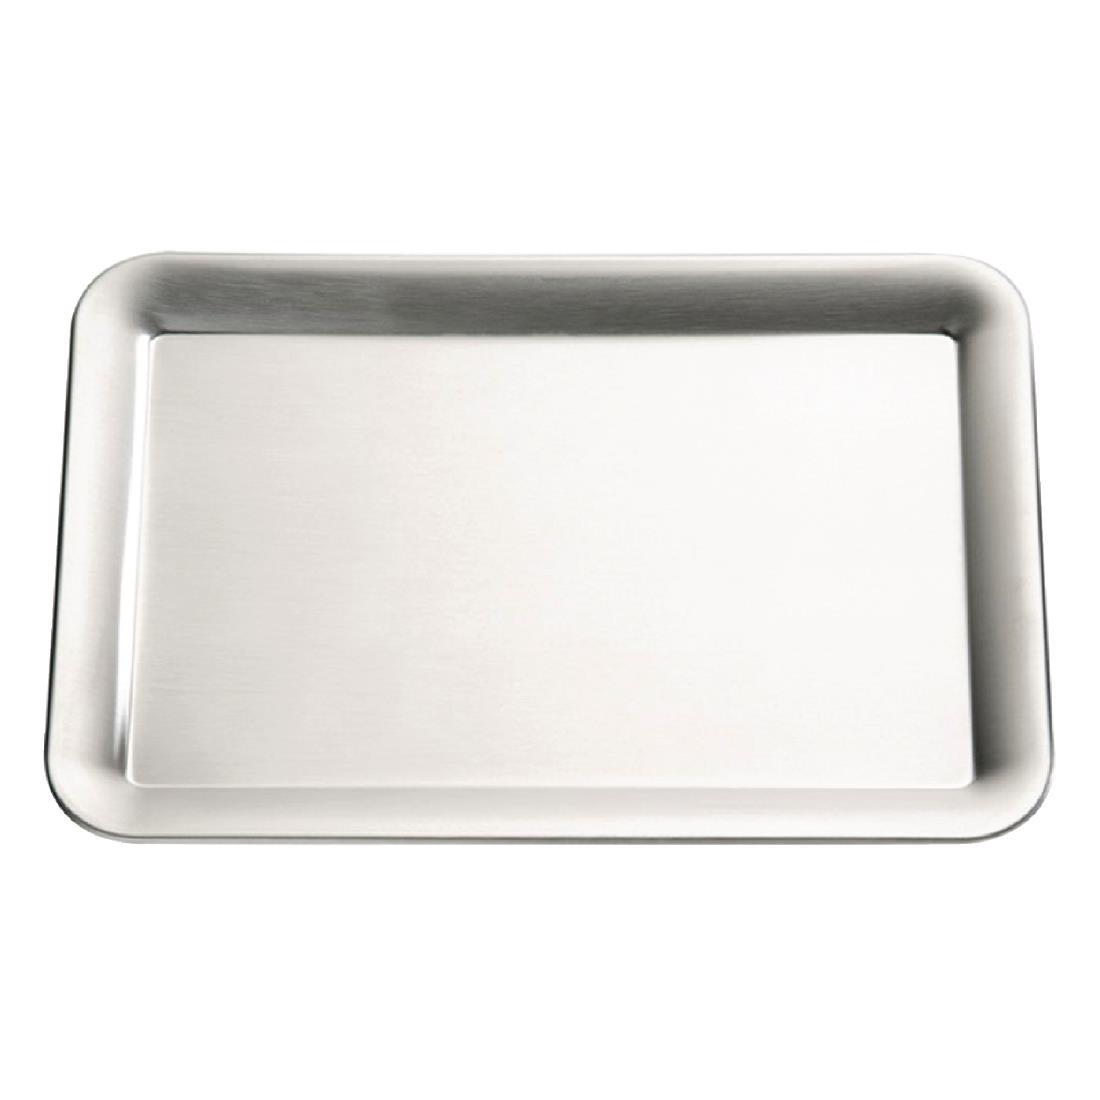 APS Pure Stainless Steel Tray - GF162  - 1